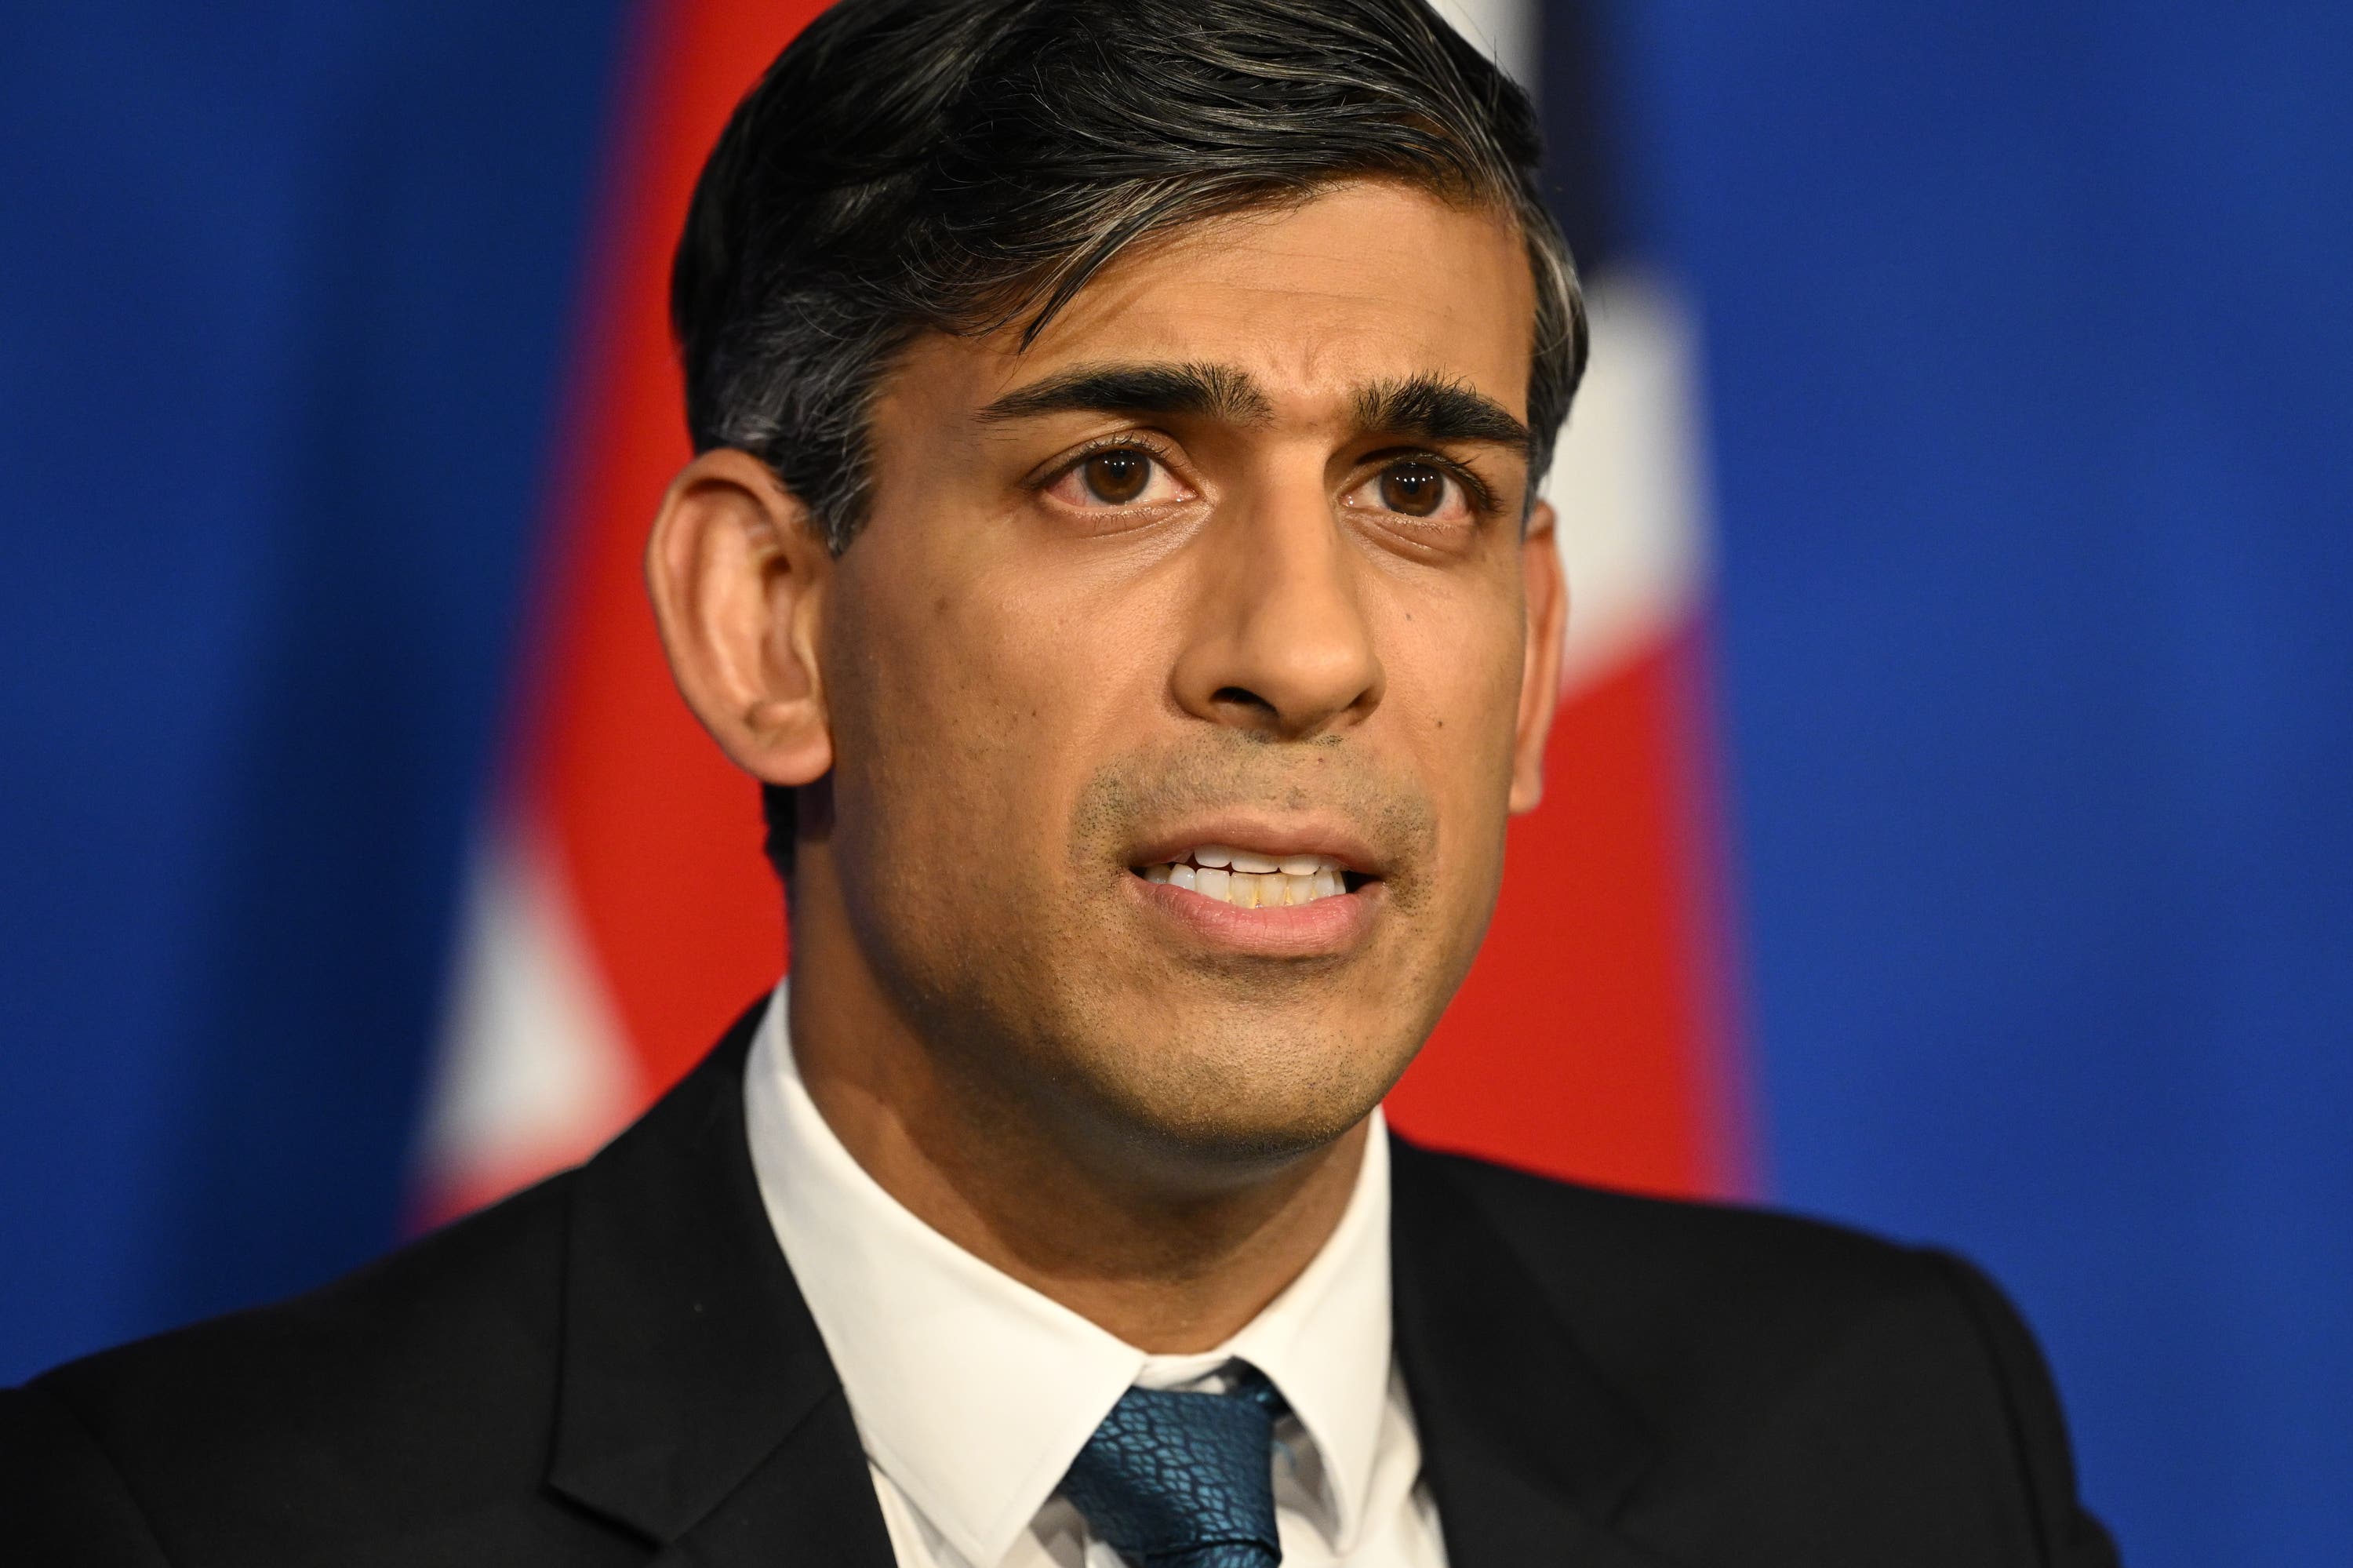 Prime Minister Rishi Sunak has been accused of watering down net zero pledges.